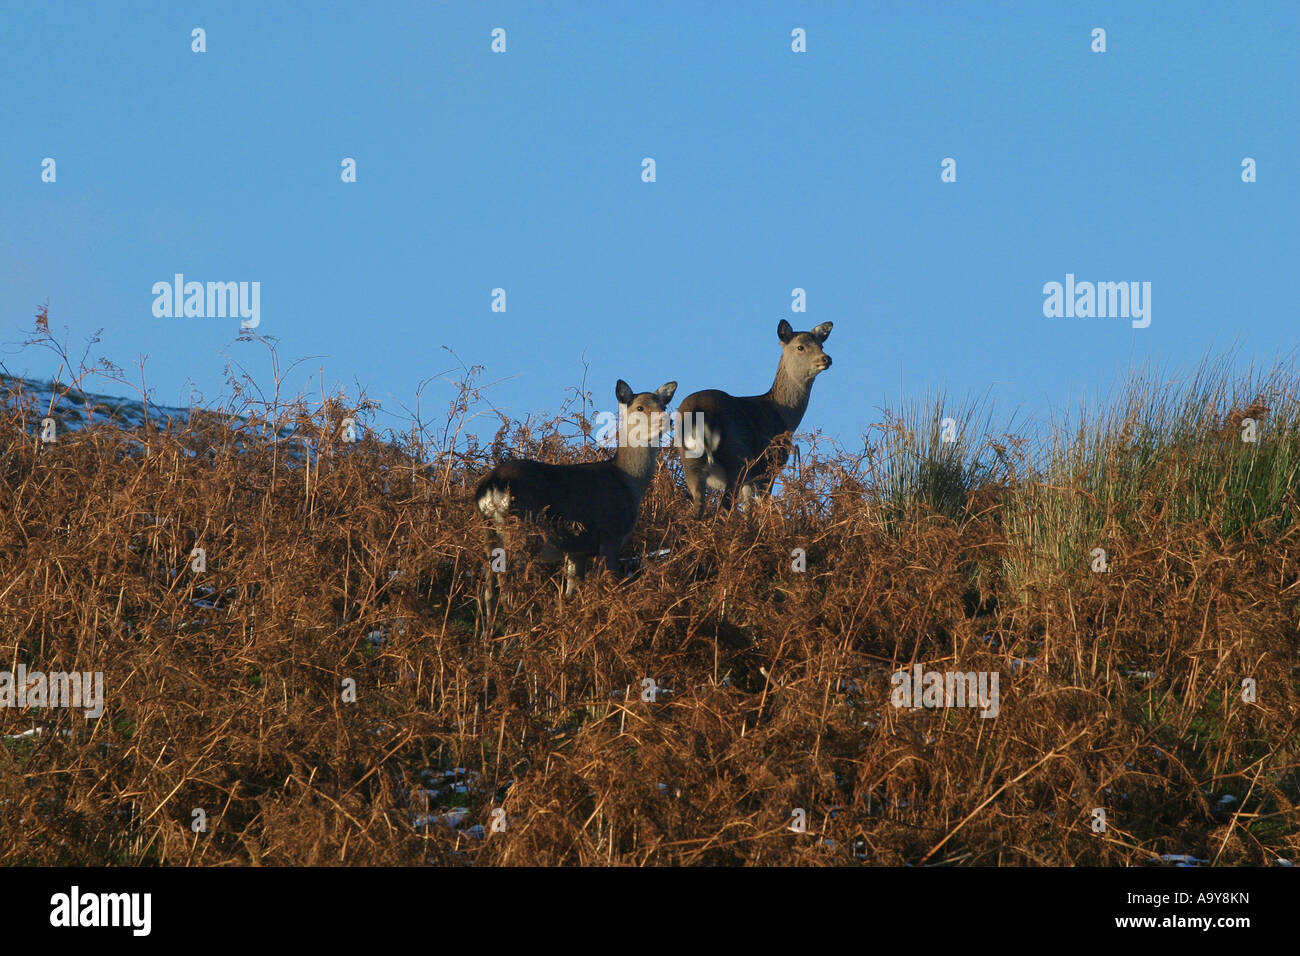 two deer in bracken on the crest of a hill looking alarmed disturbed in wonderment ready to bolt Stock Photo